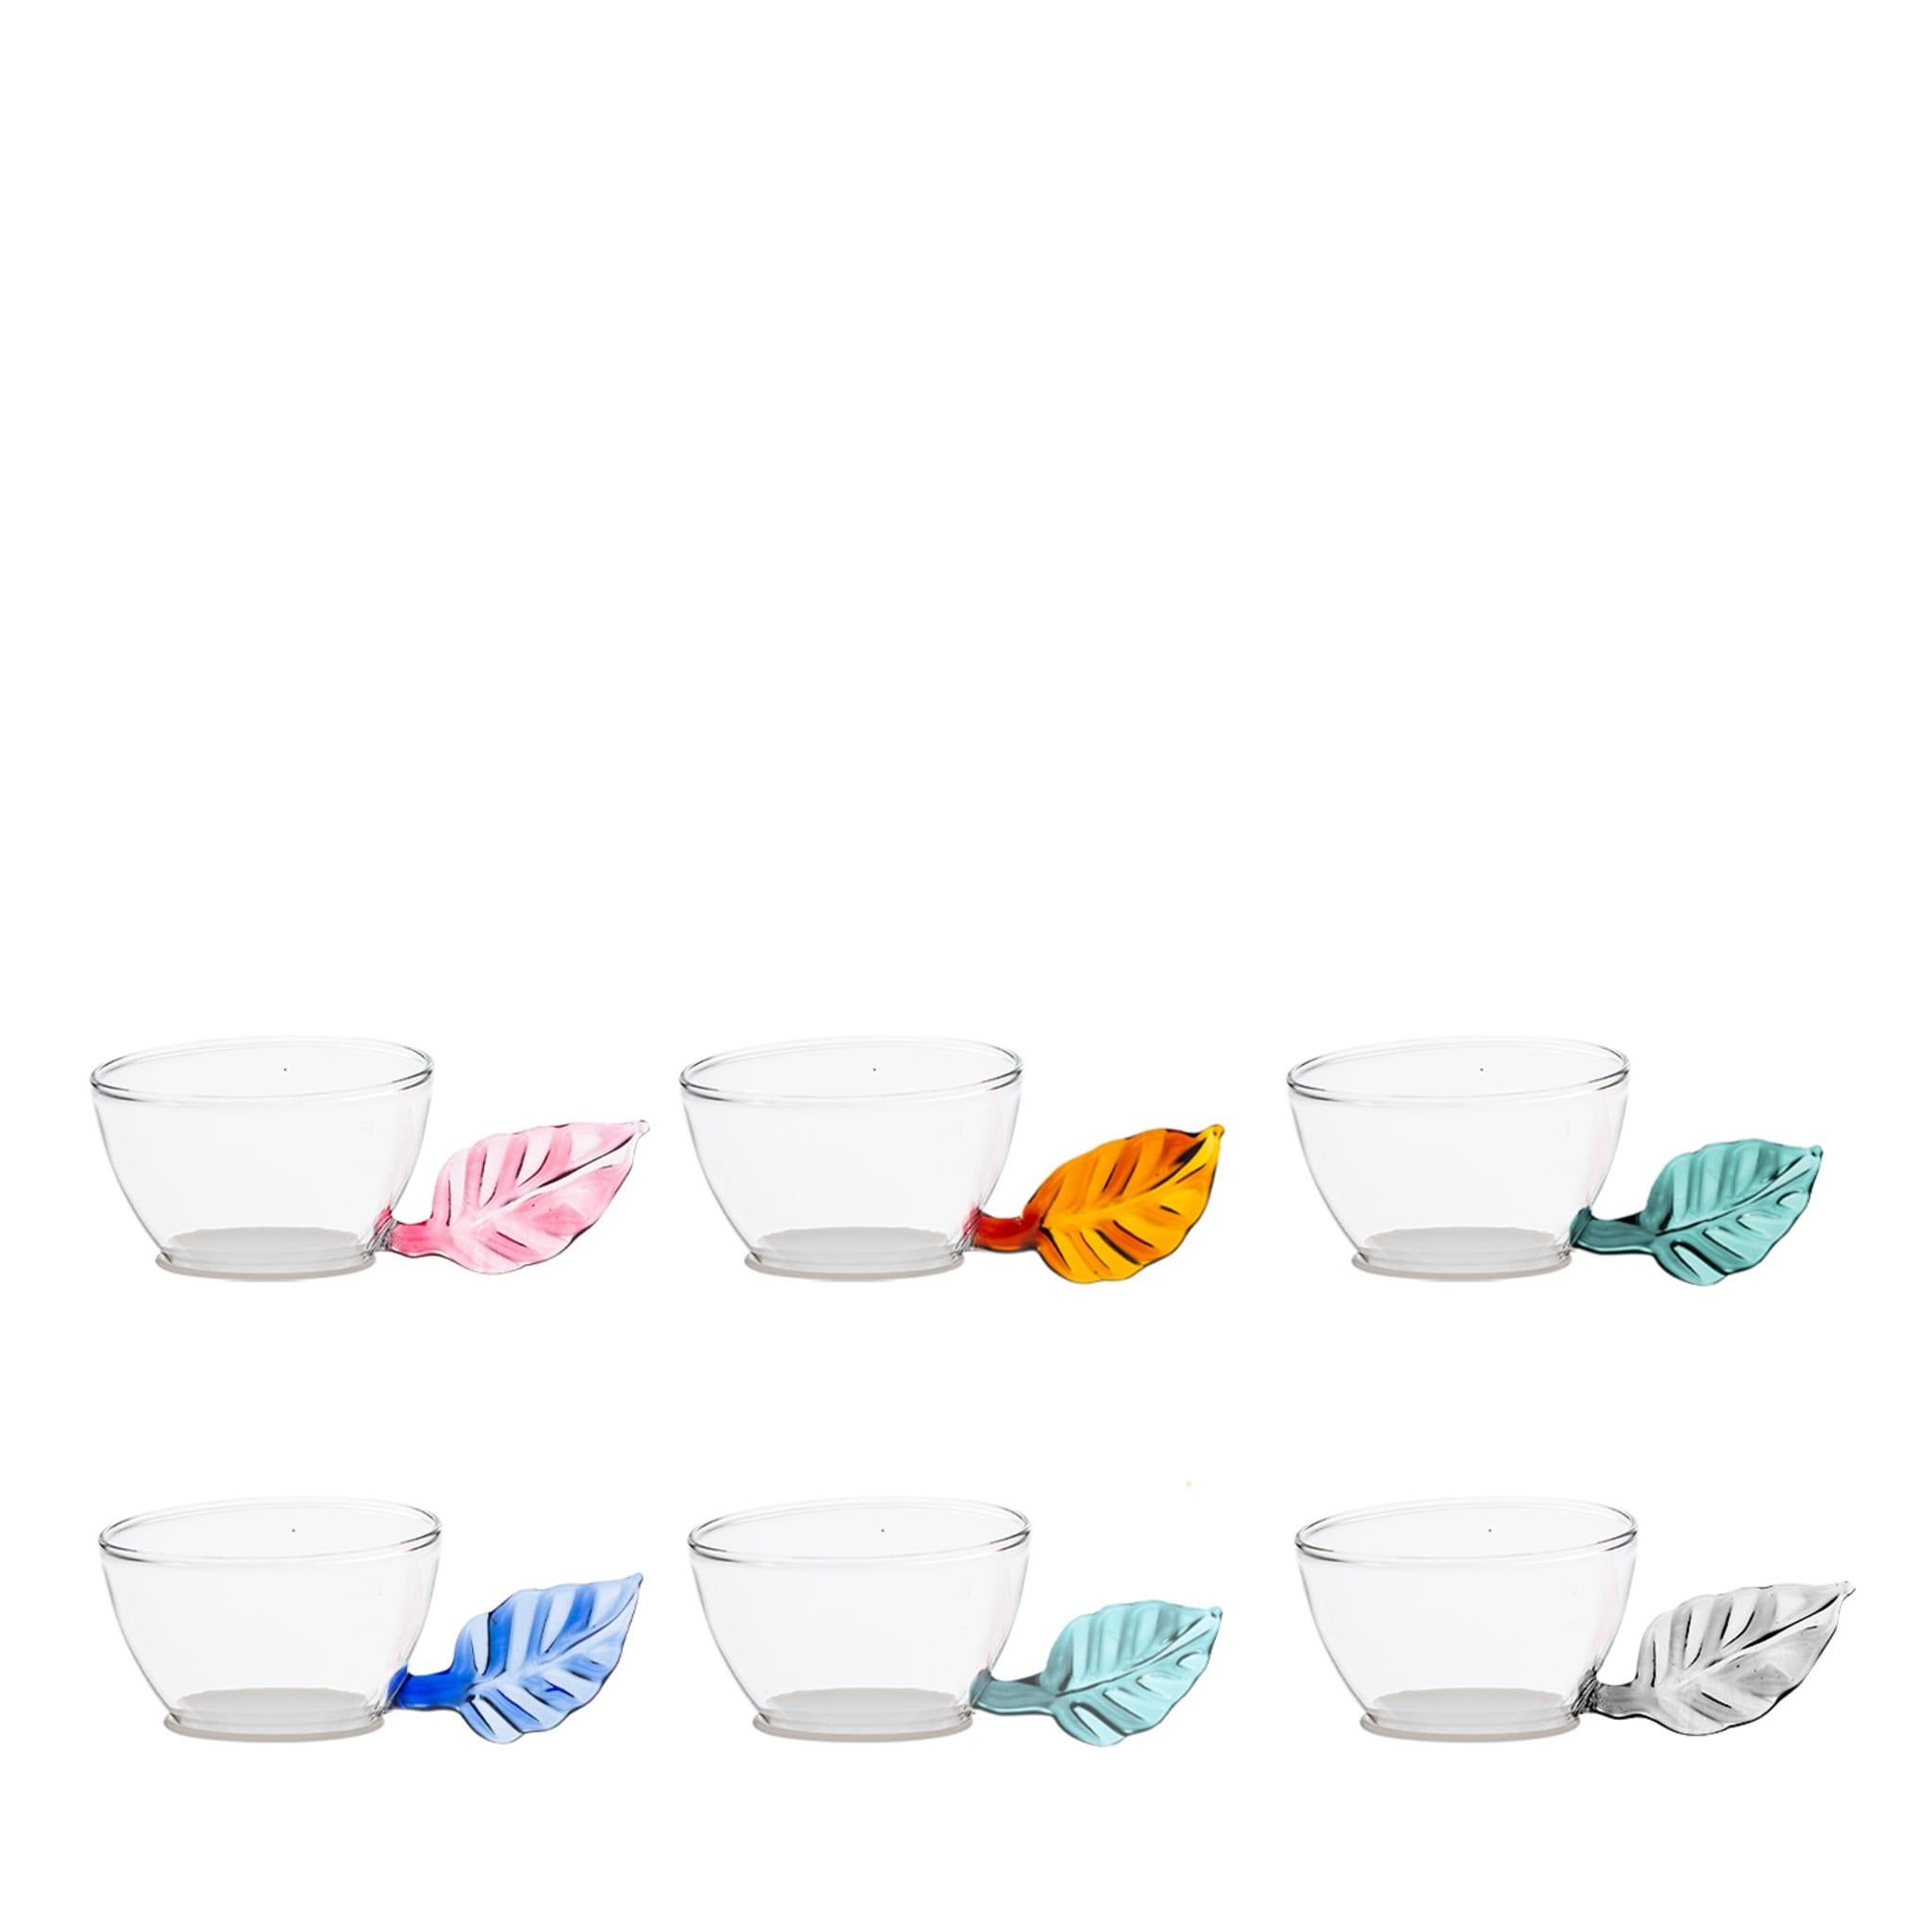 Small and cute mini cups in transparent glass with a colored leaf as a handle and a cylindric white glass base were placed it. This set of 6 cups is handcrafted in Venice. It's possible to wash them in the dishwasher.